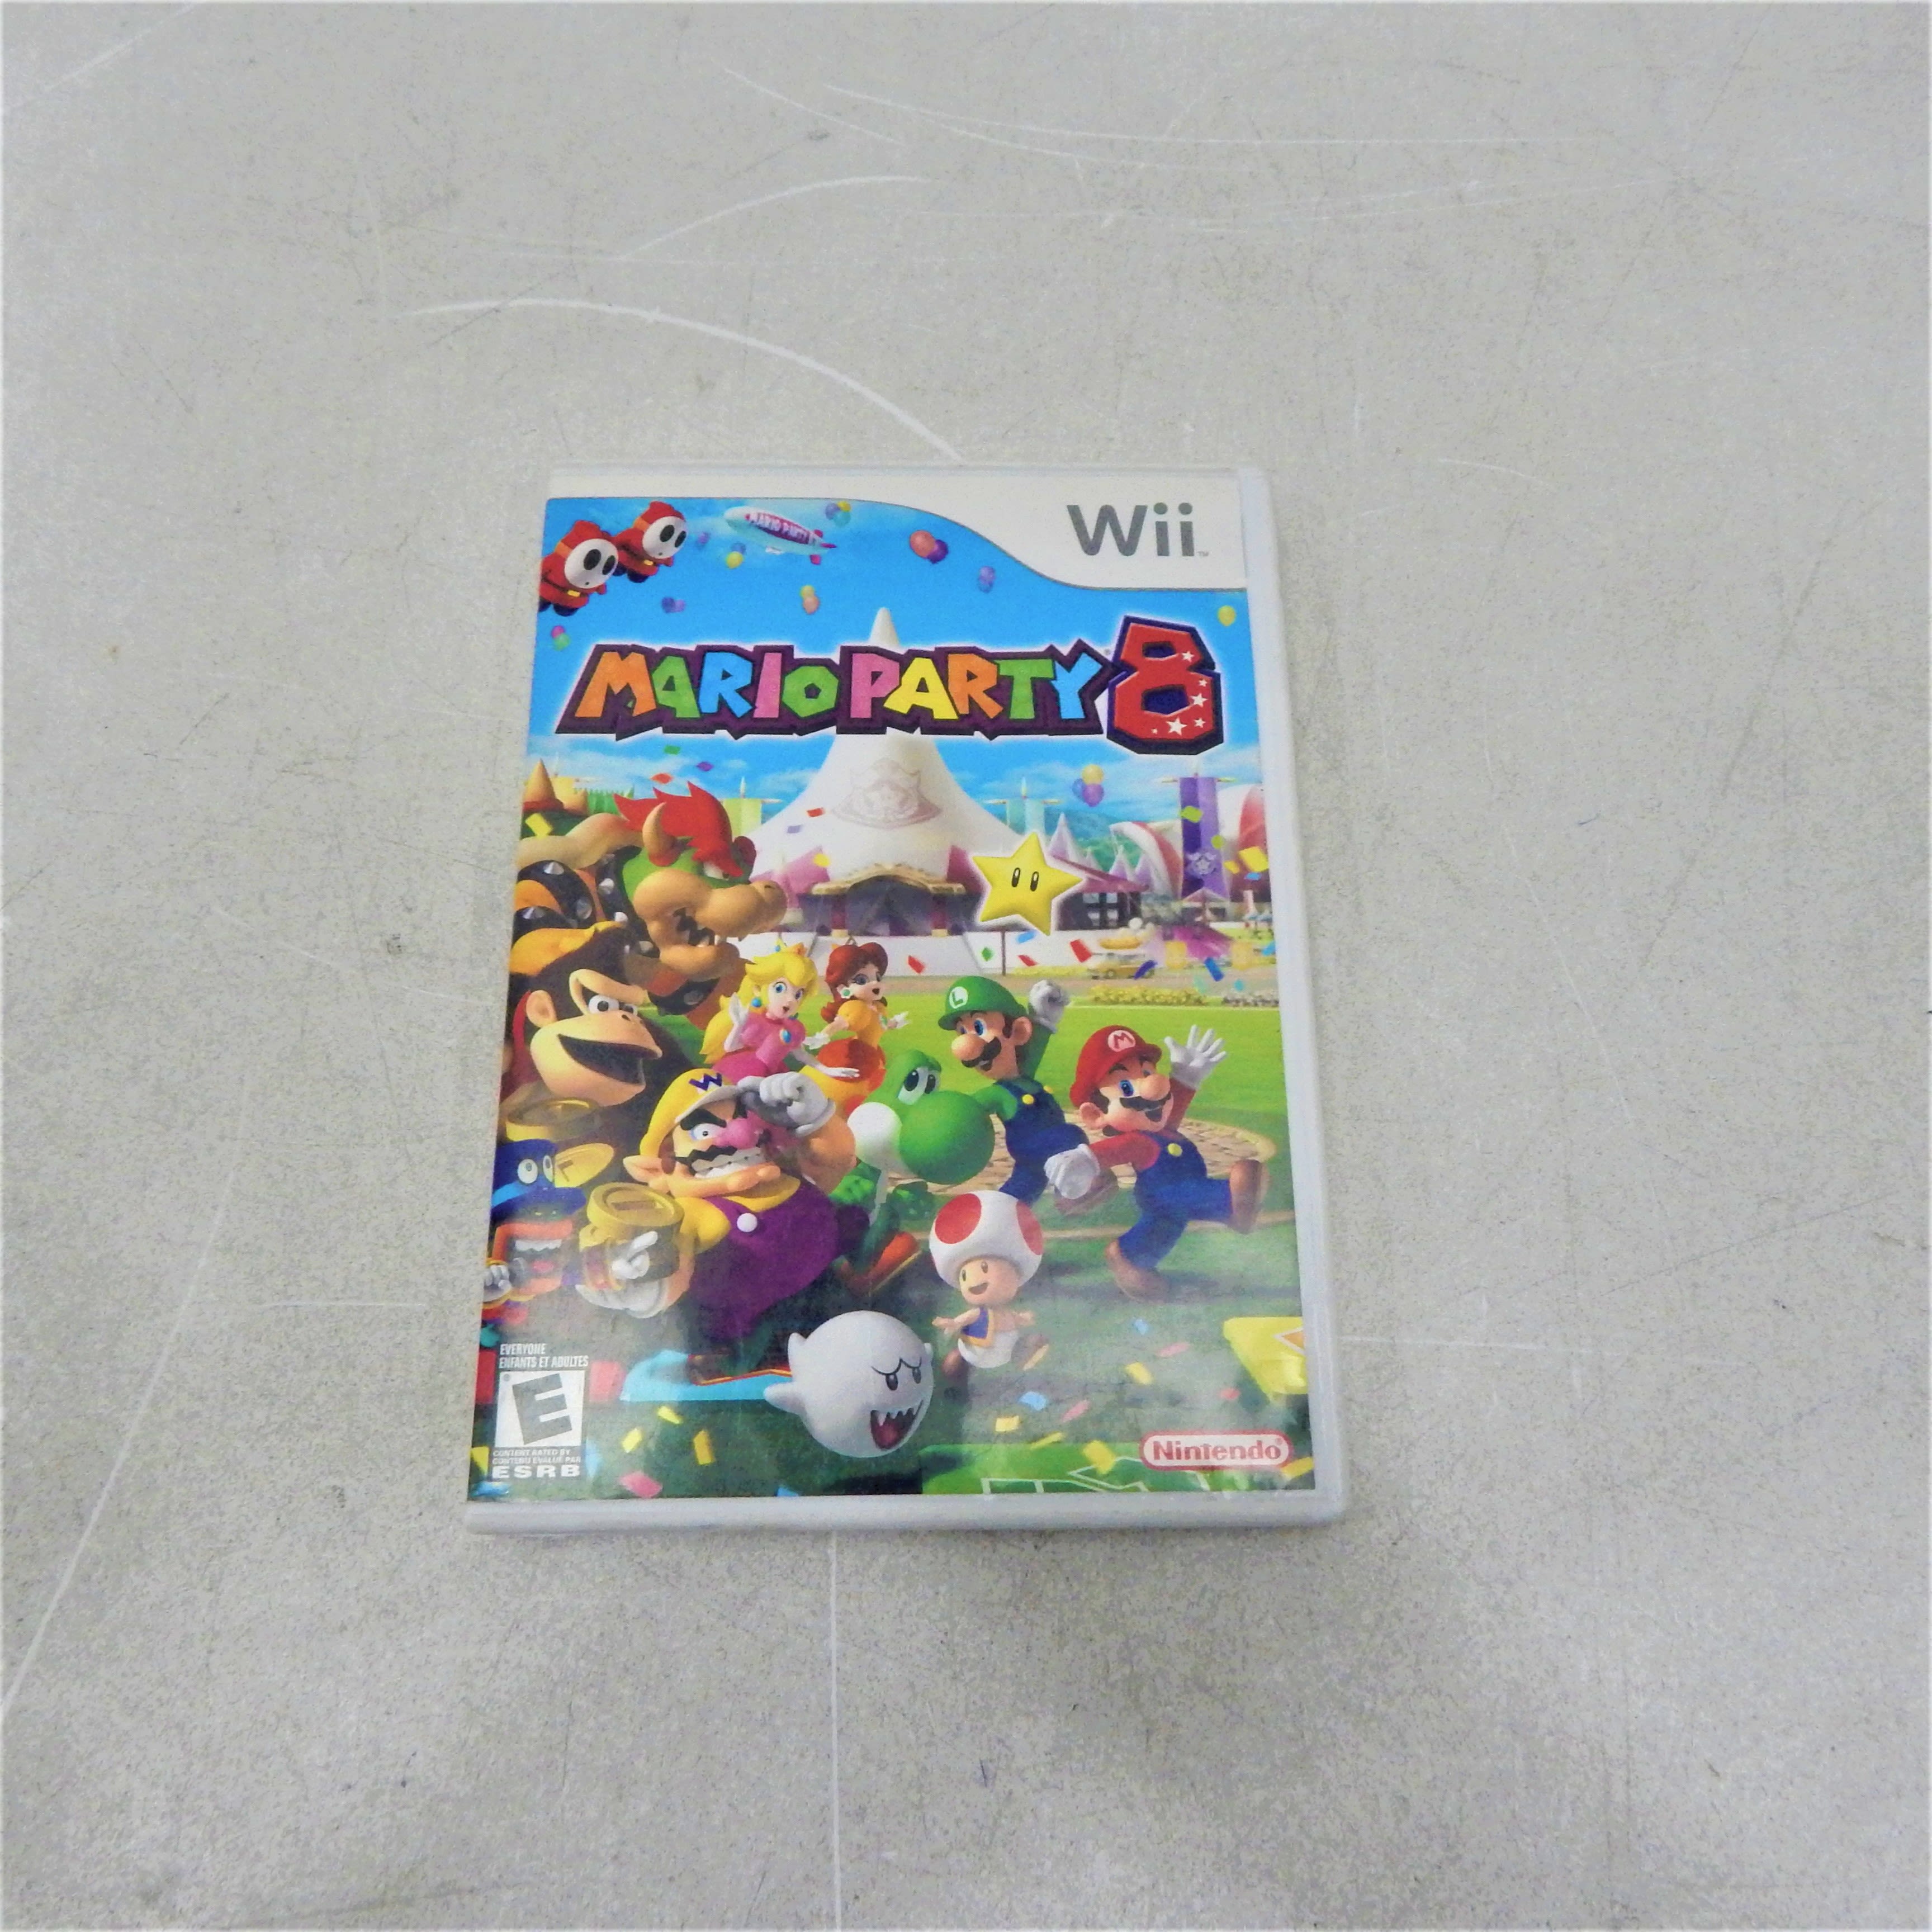 Buy The Mario Party 8 Nintendo Wii Cb Goodwillfinds 7333